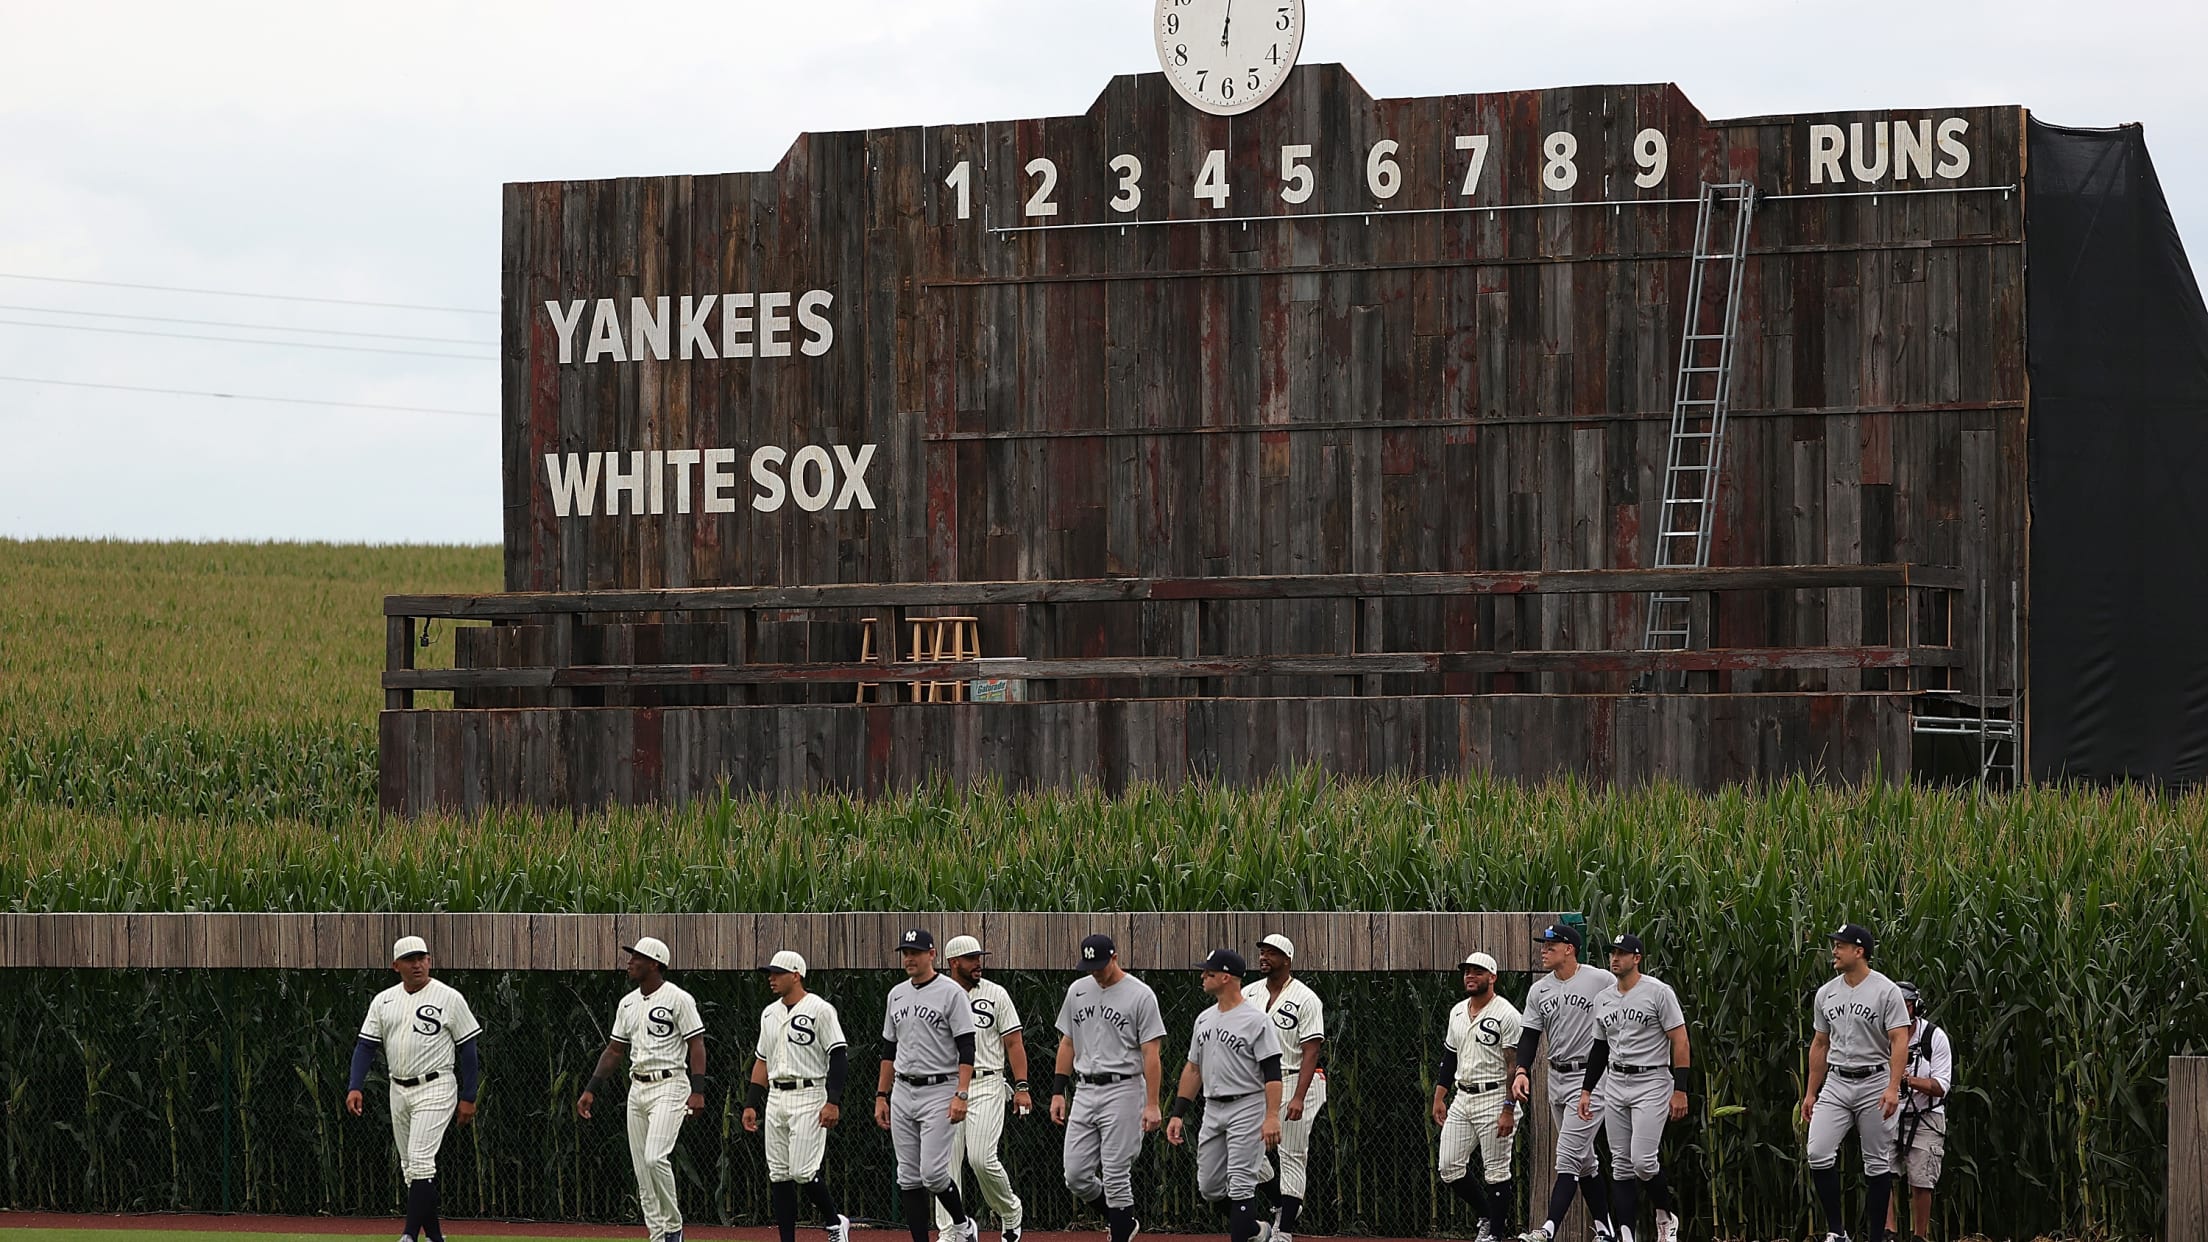 Field of Dreams game: Walk-off homer caps Hollywood ending for White Sox, MLB